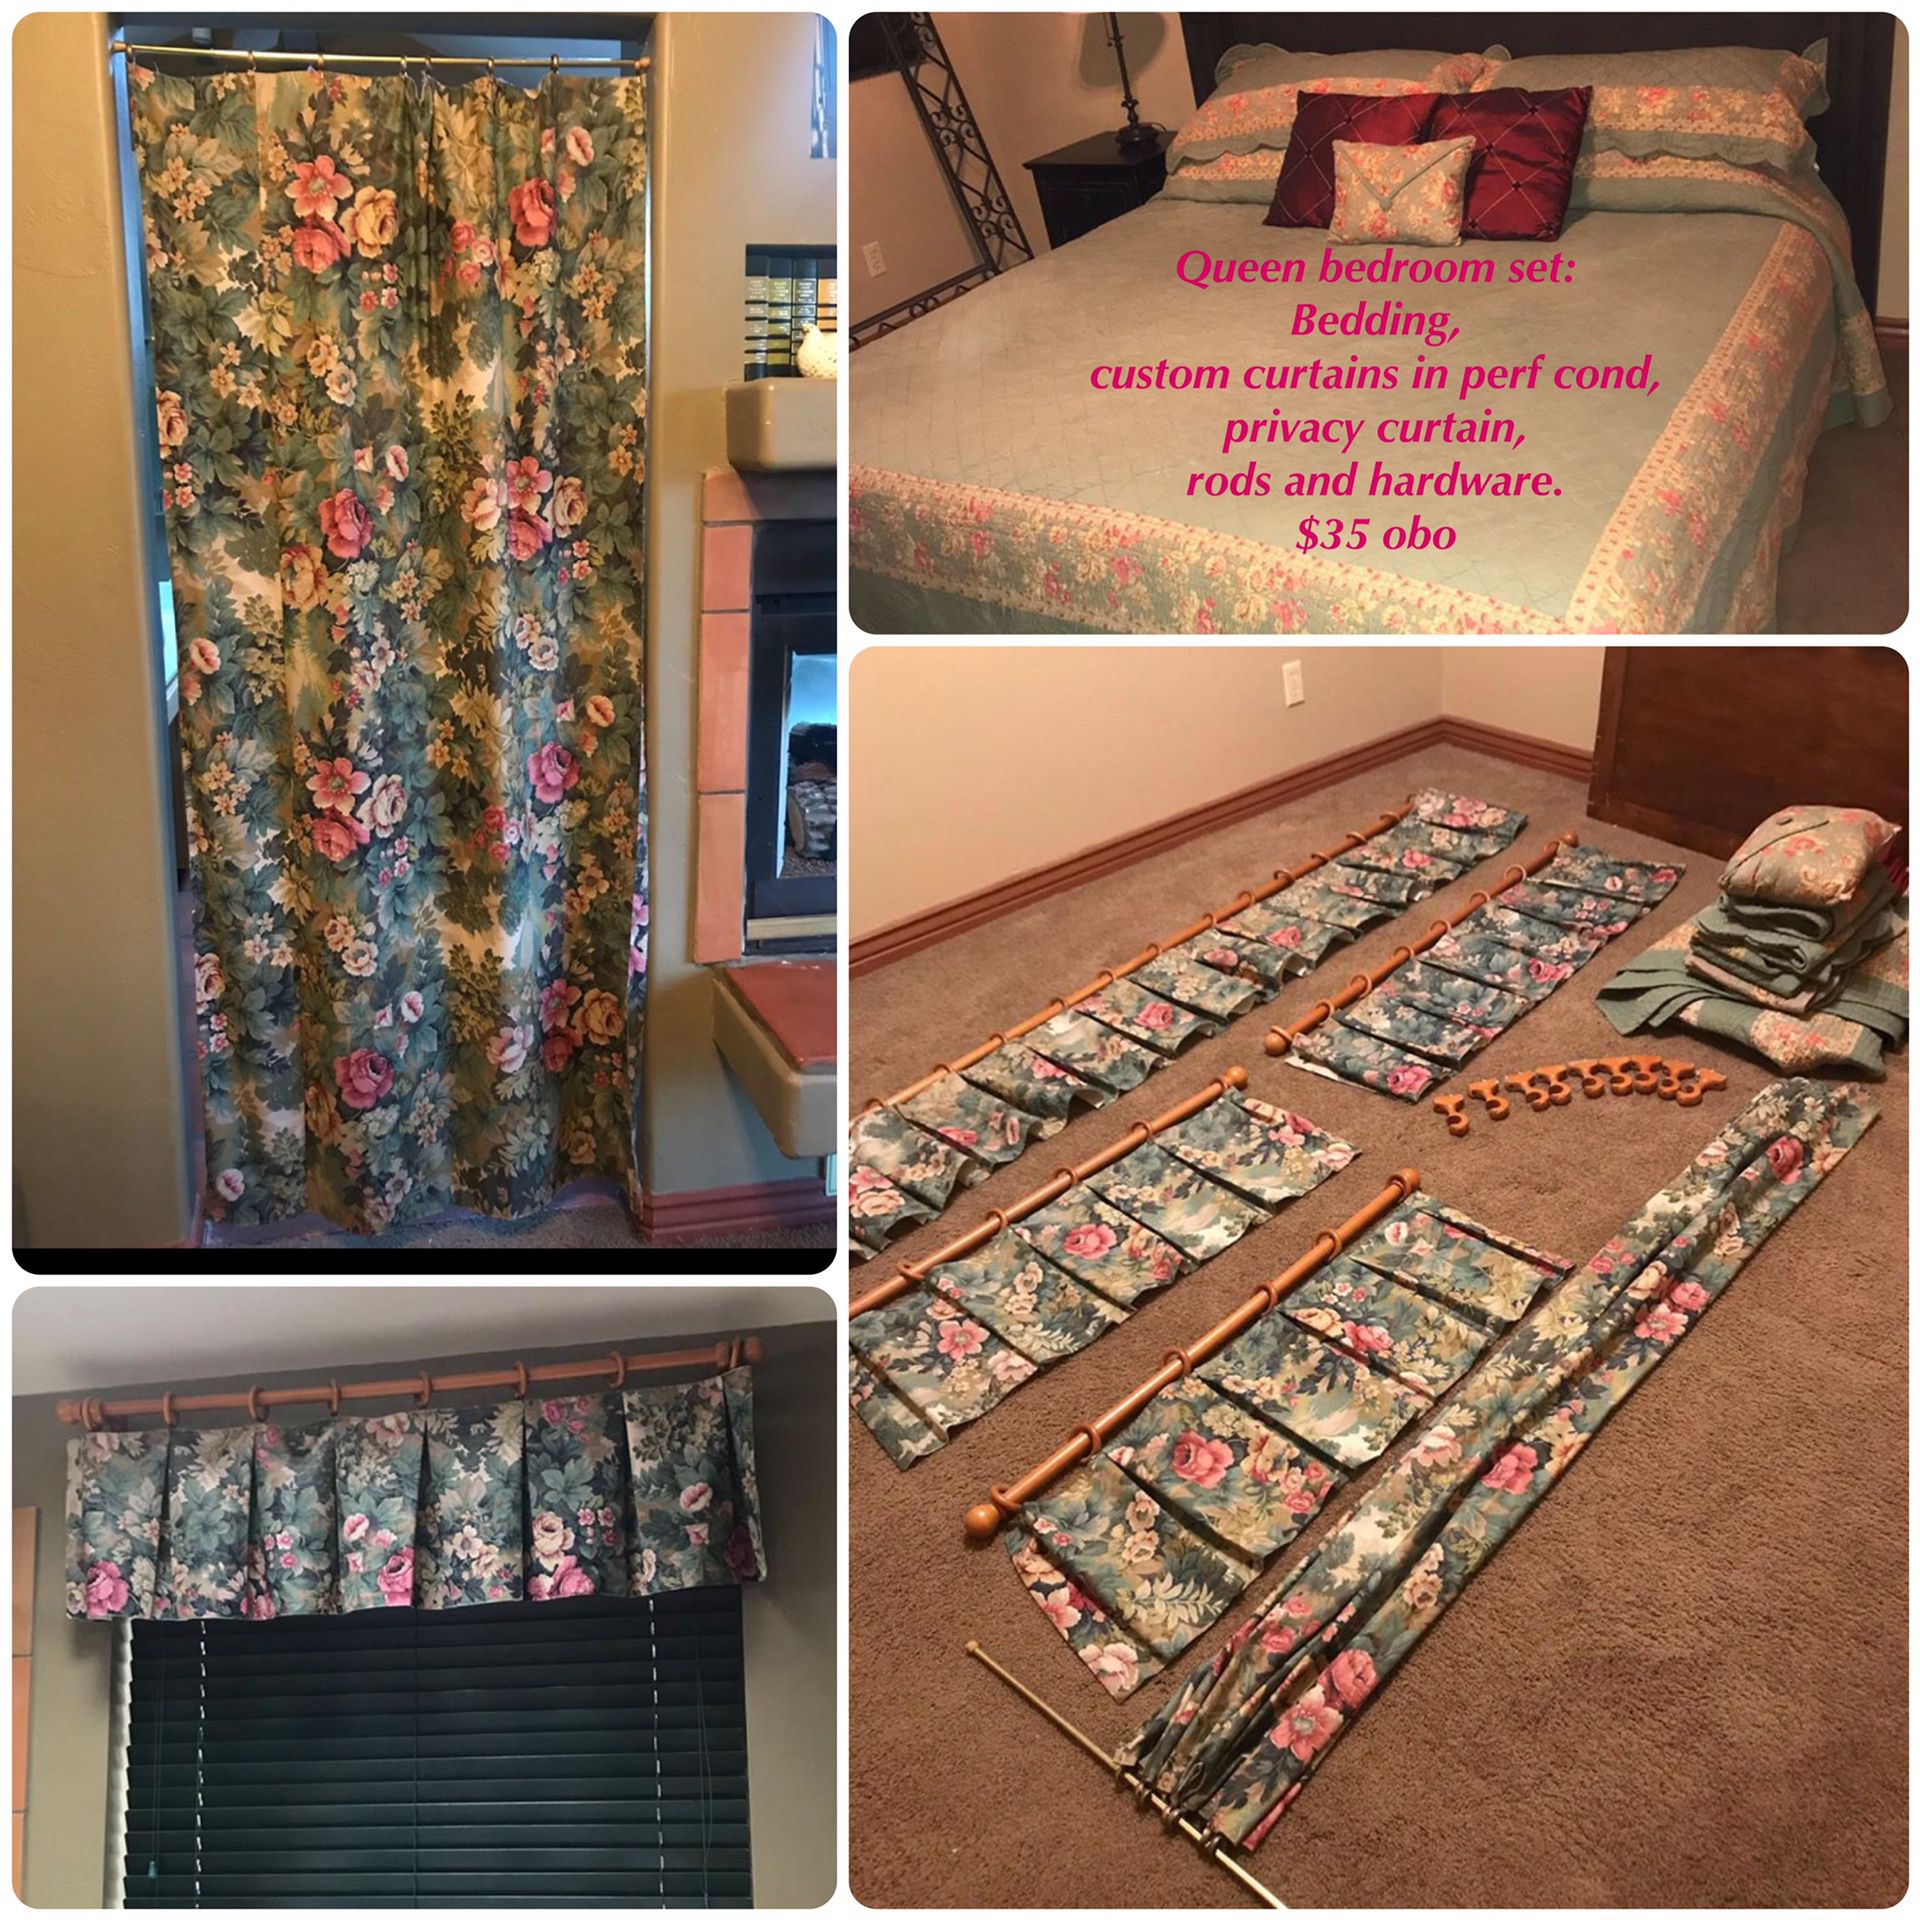 Queen bedding set, Custom curtains, rods and hardware.